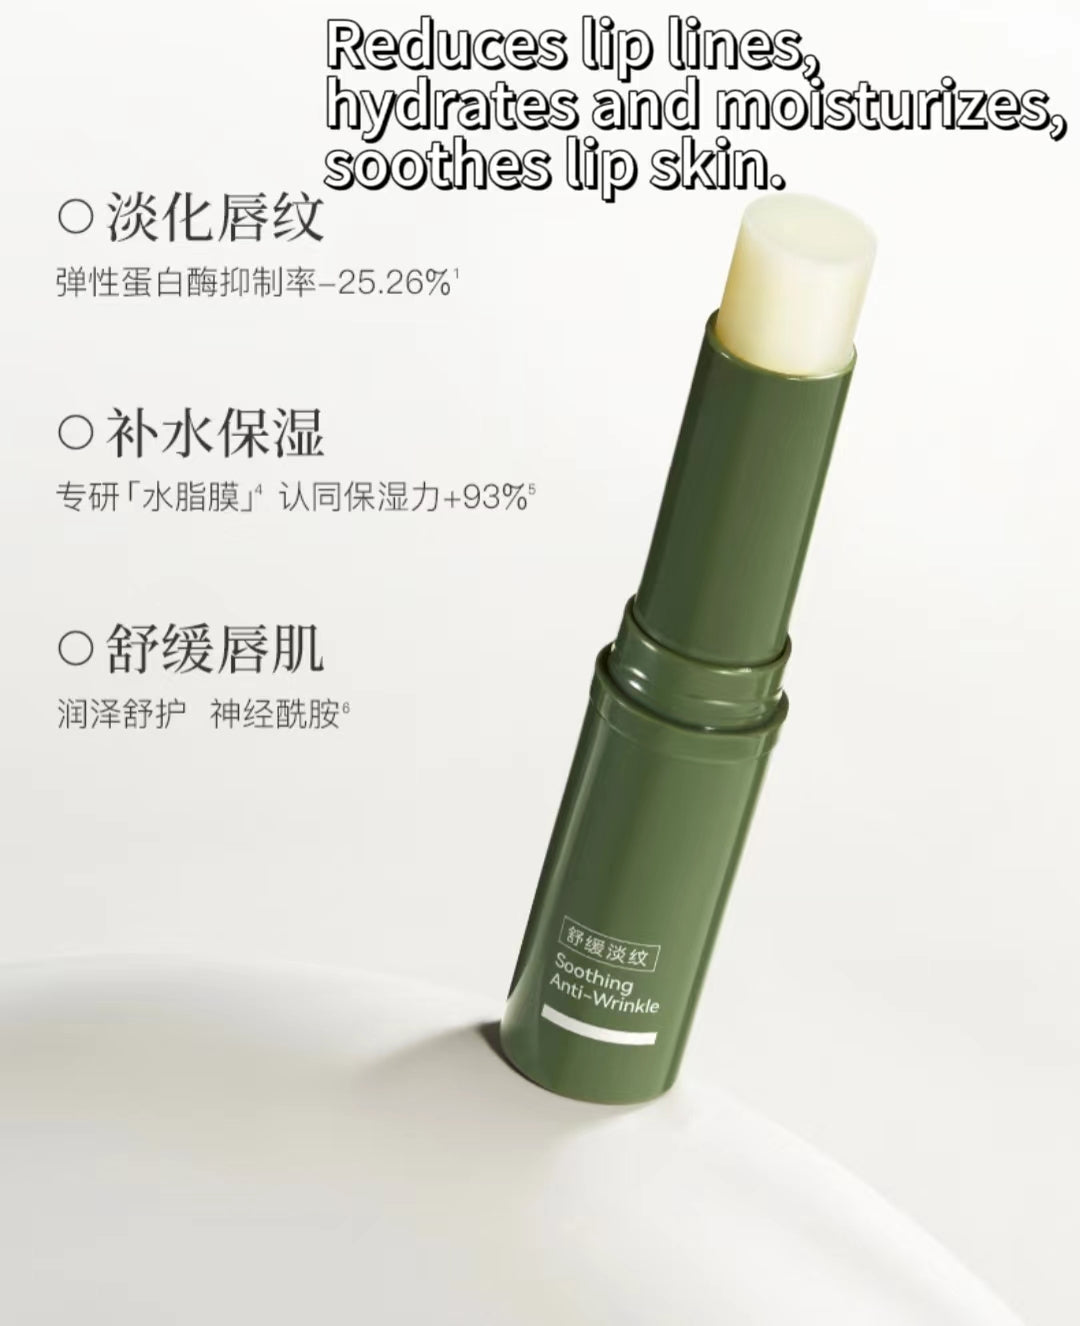 Watercome Soothing Lip Balm for Fine Lines 3g 水之蔻舒缓淡纹润唇膏